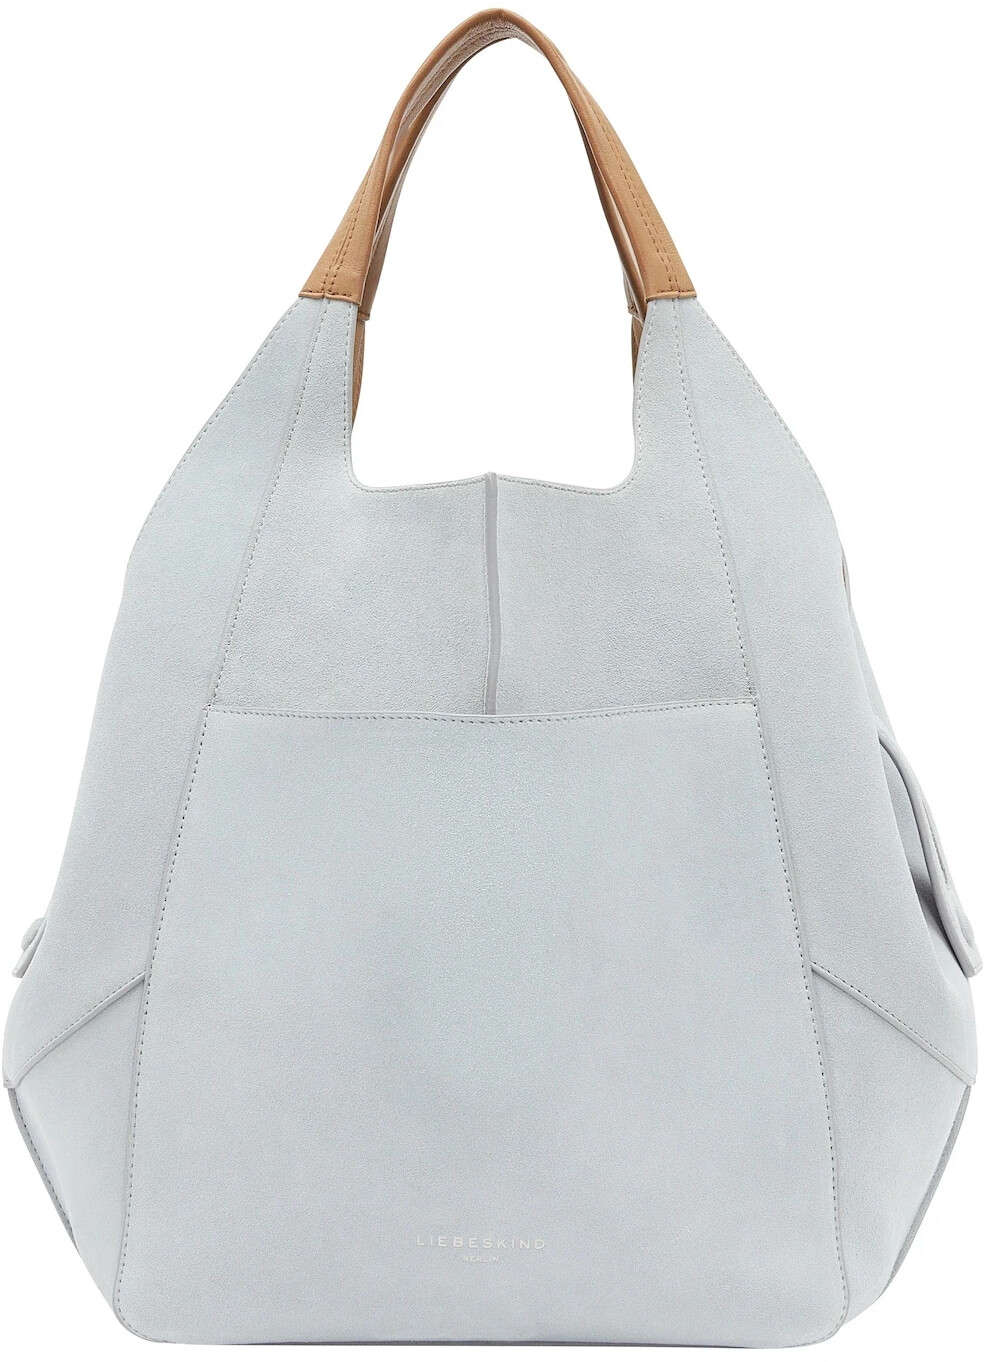 Liebeskind Lilly Promo Suede Tote Bag L alice blue ab 329,00